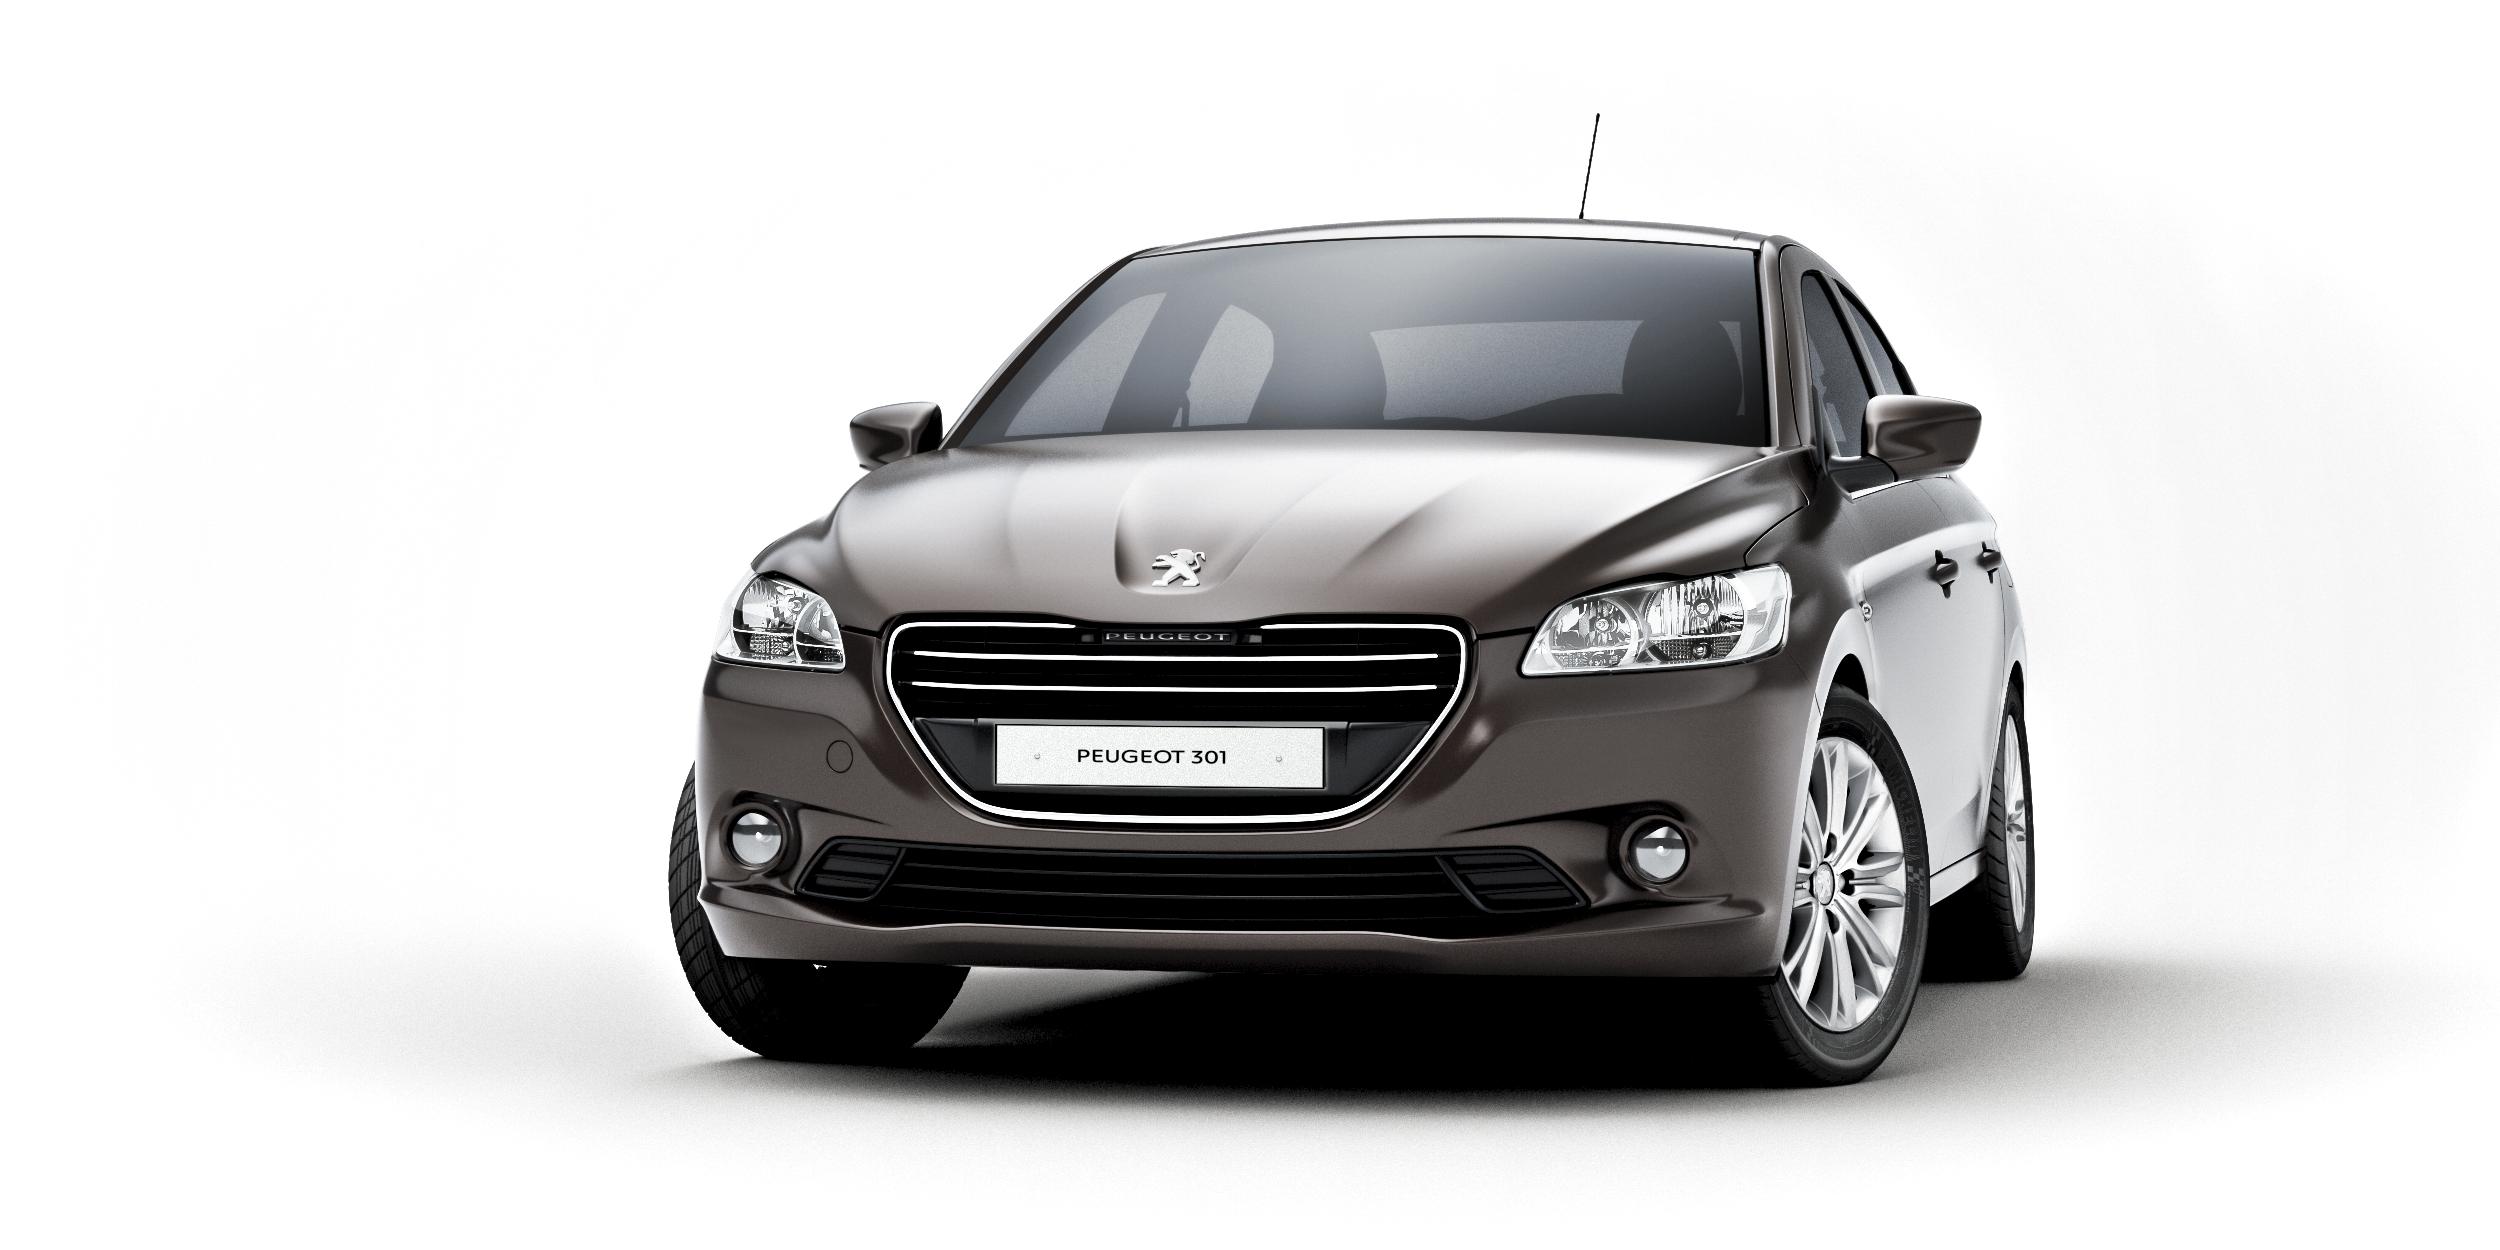 2013 Peugeot 301 - Designed for Bad Roads and Big People